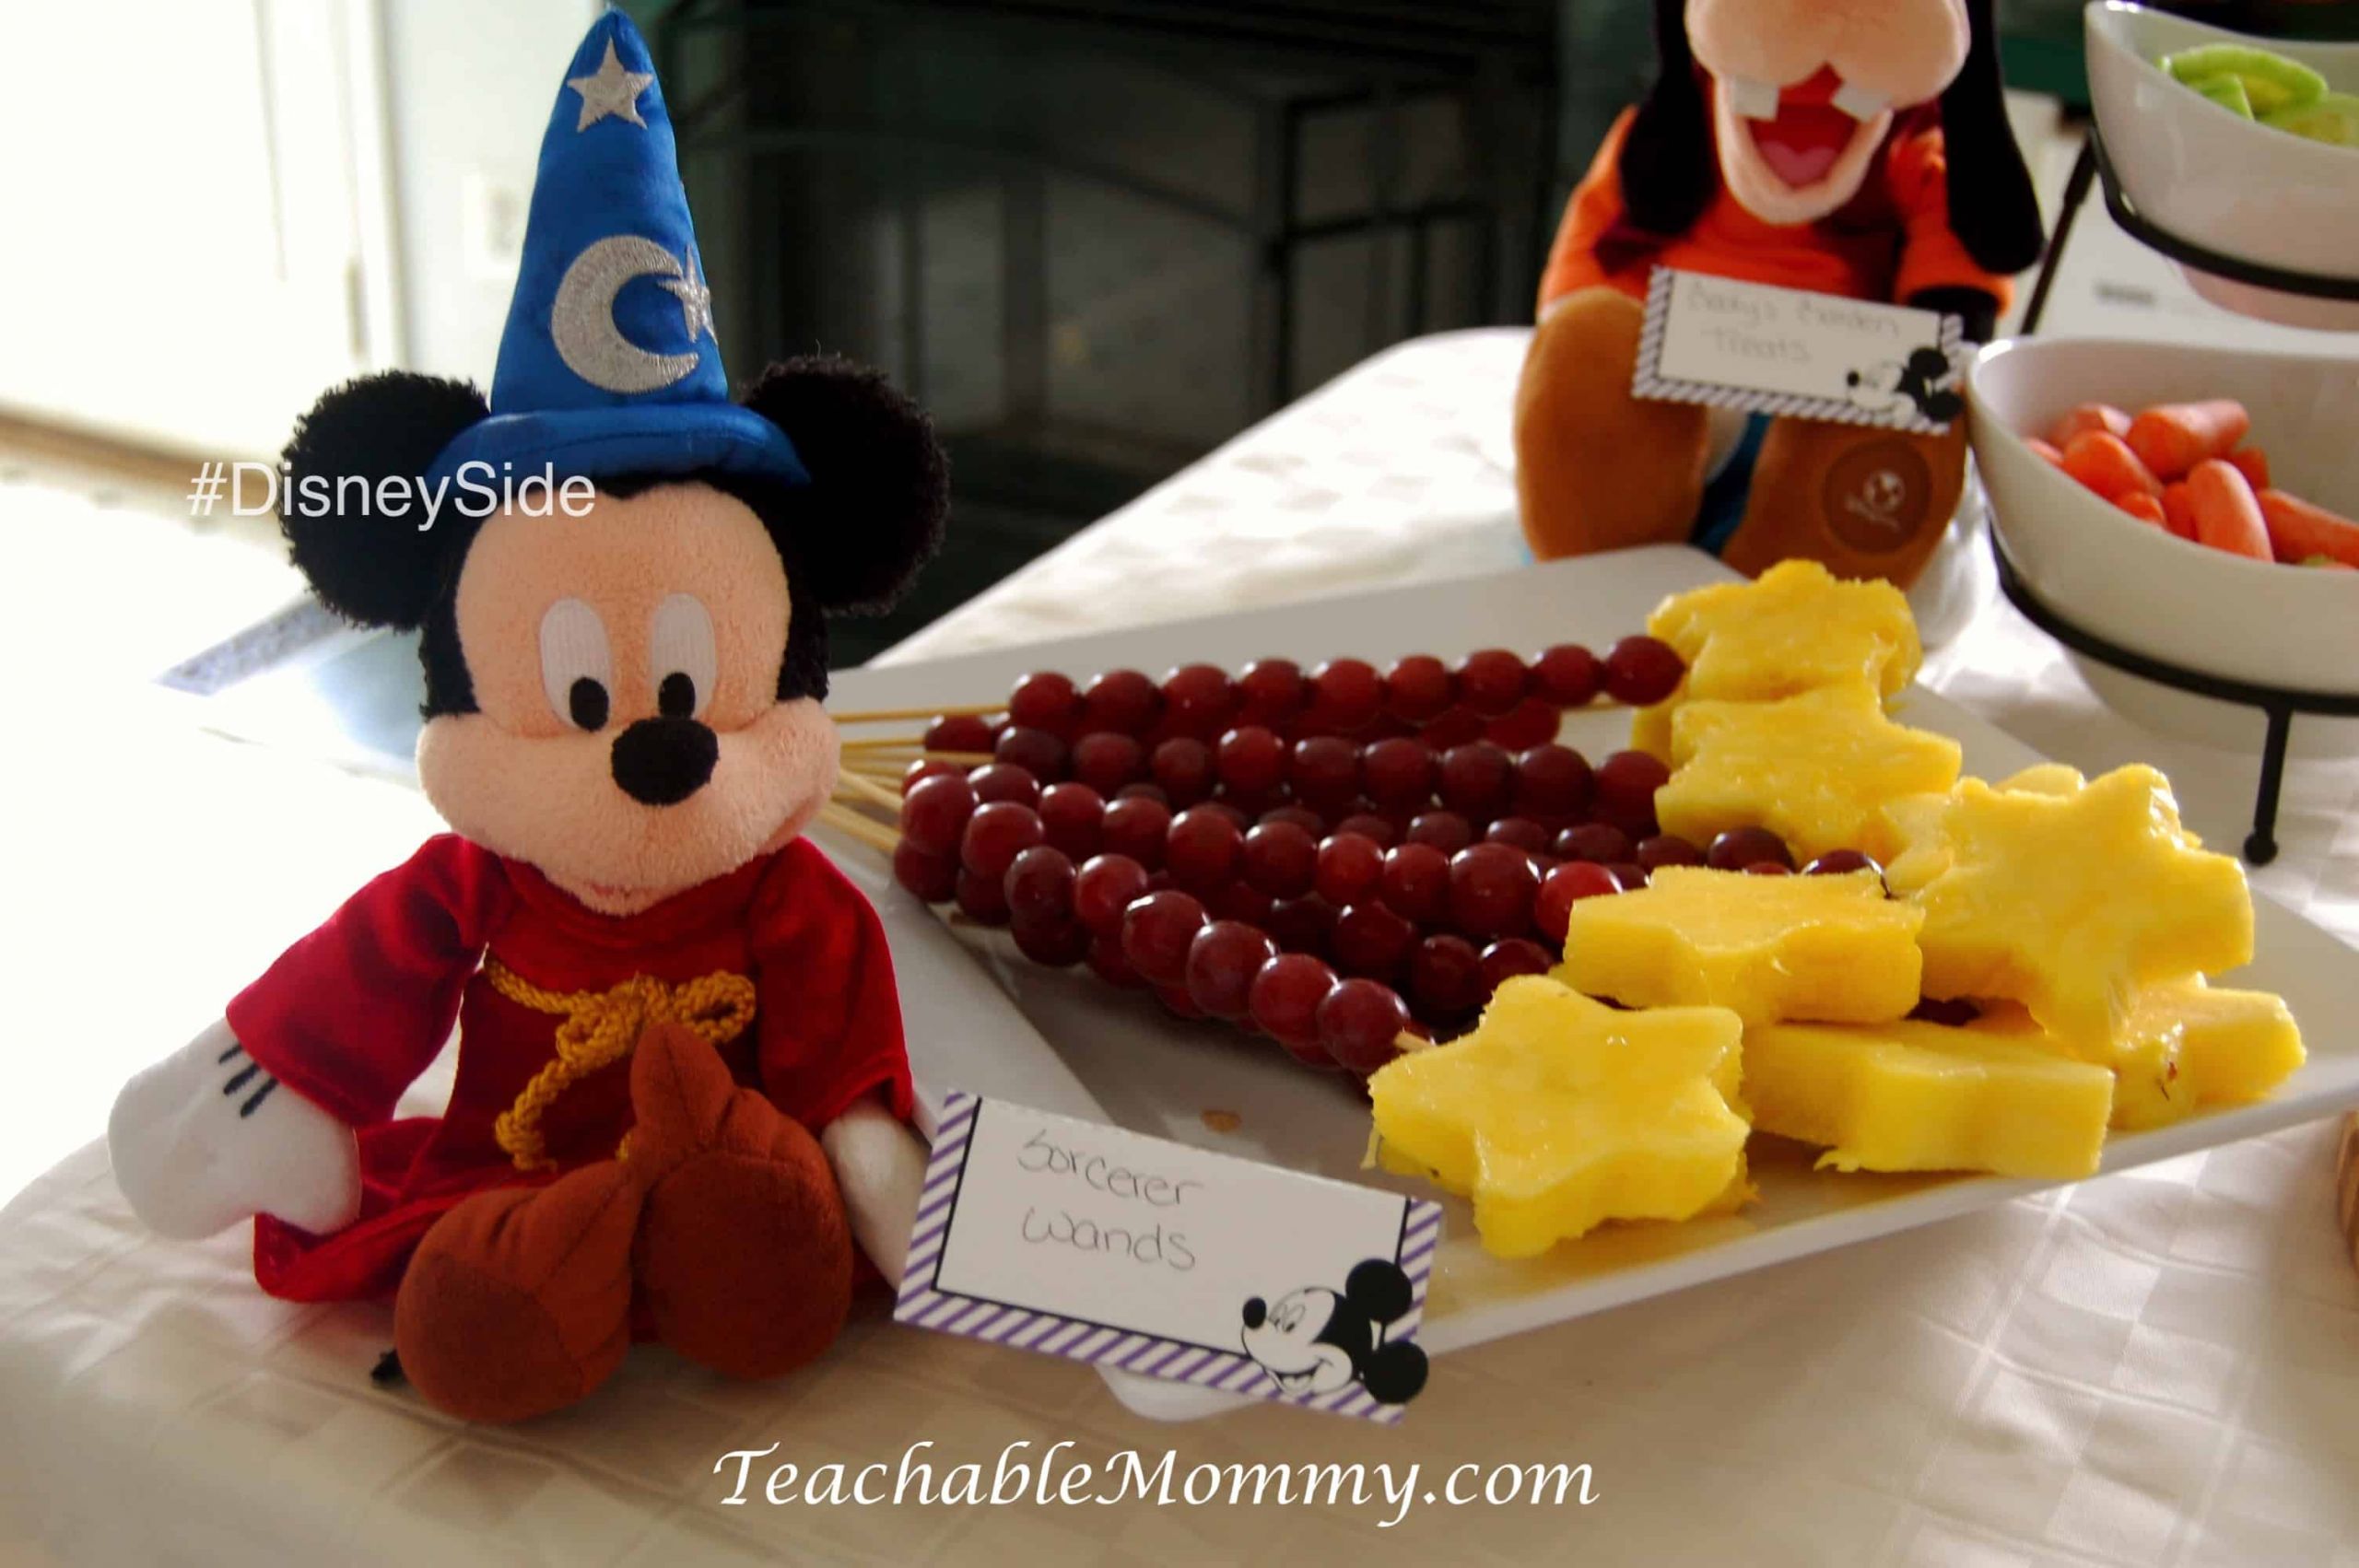 Disney Party Food Ideas
 Showing Our DisneySide with Decorations and Food